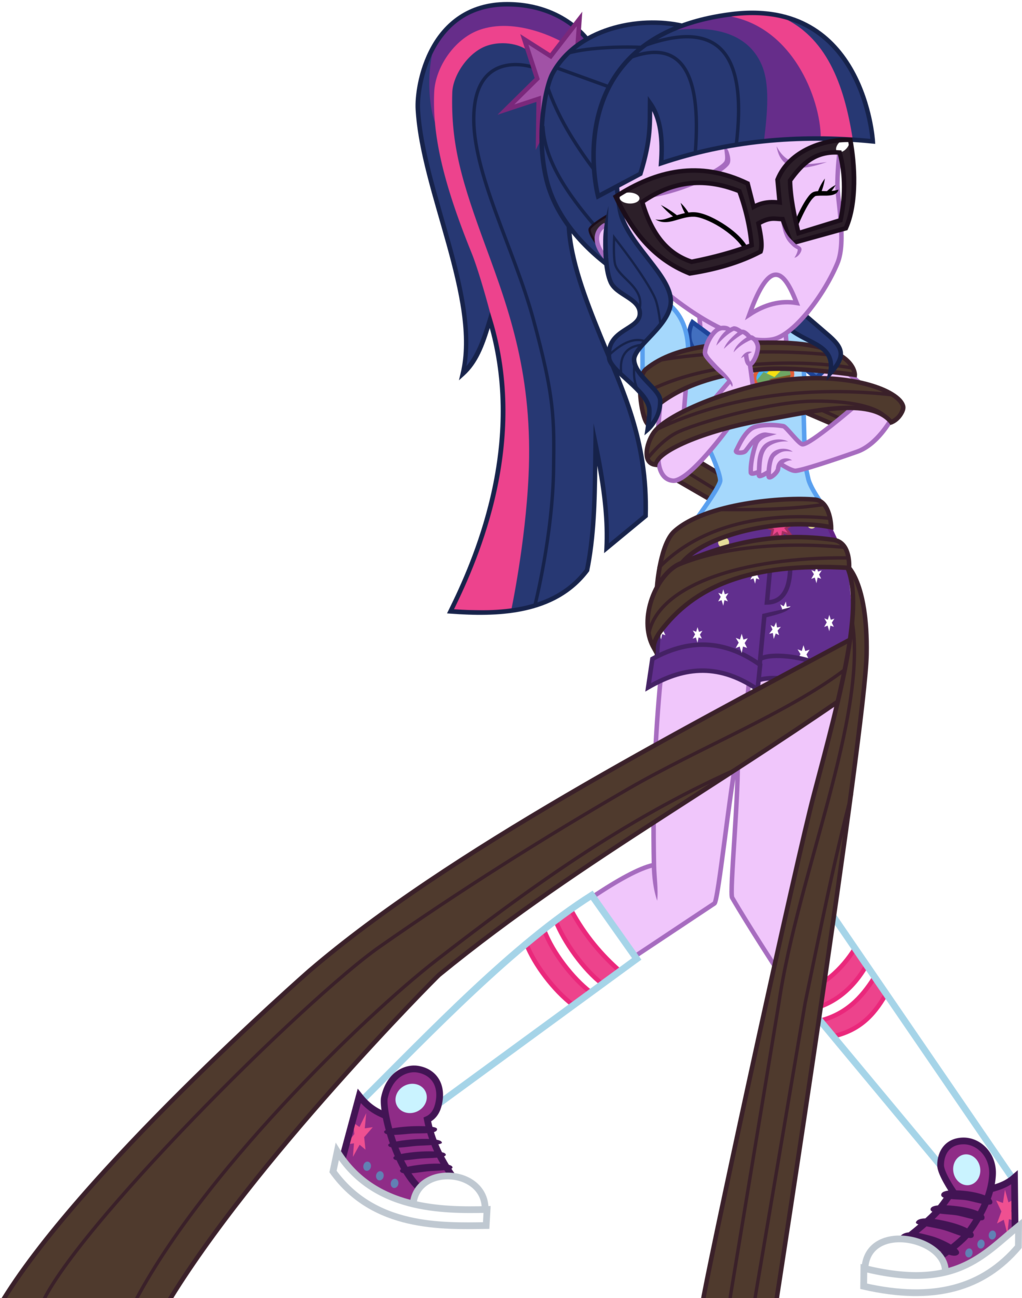 Limedazzle 152 49 Twi Stuck By Uponia - Equestria Girls Legend Of Everfree Twilight And Timber (1024x1305)